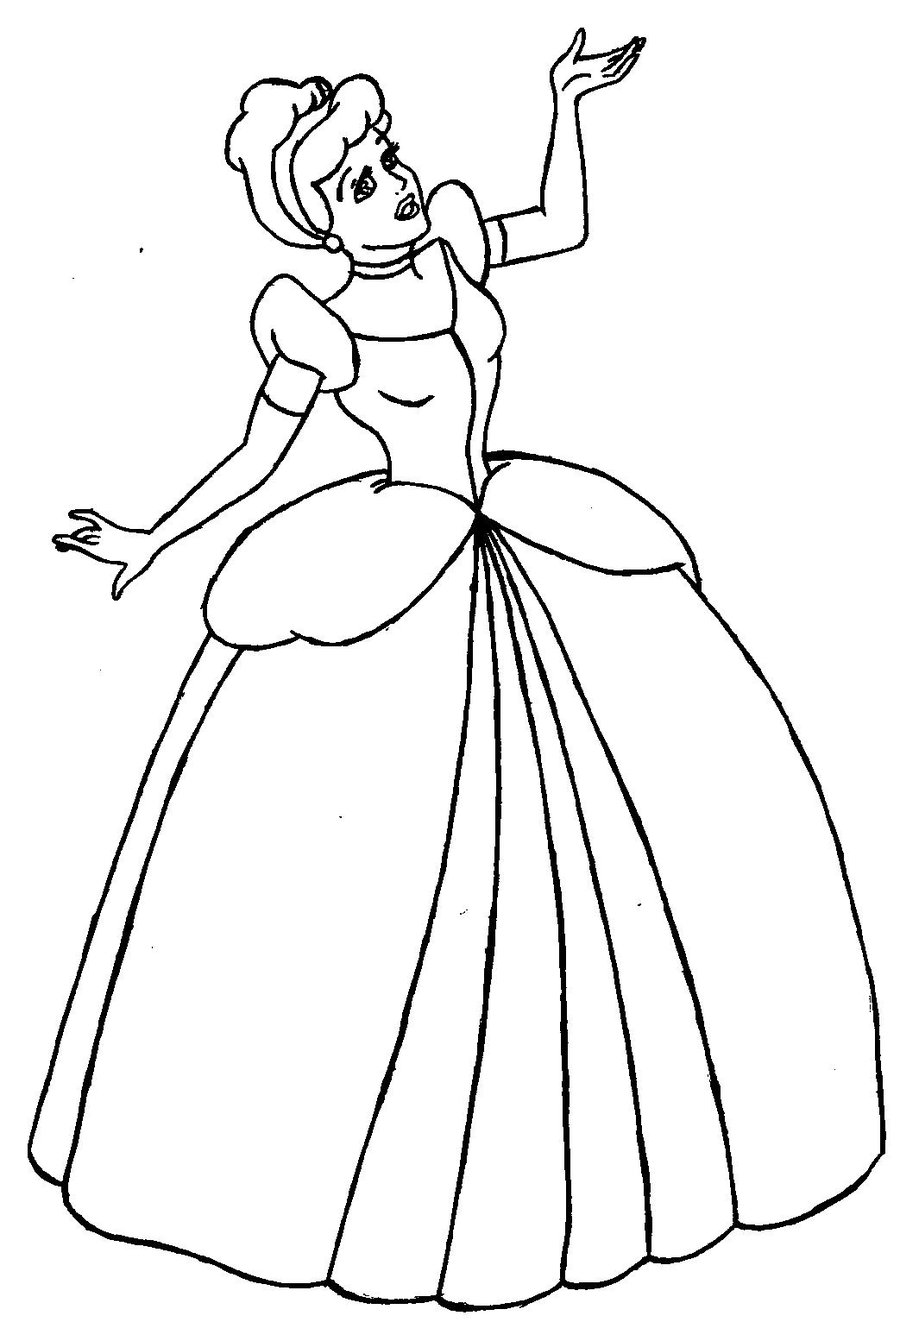 Curtain Coloring Pages at GetColorings.com | Free printable colorings ...